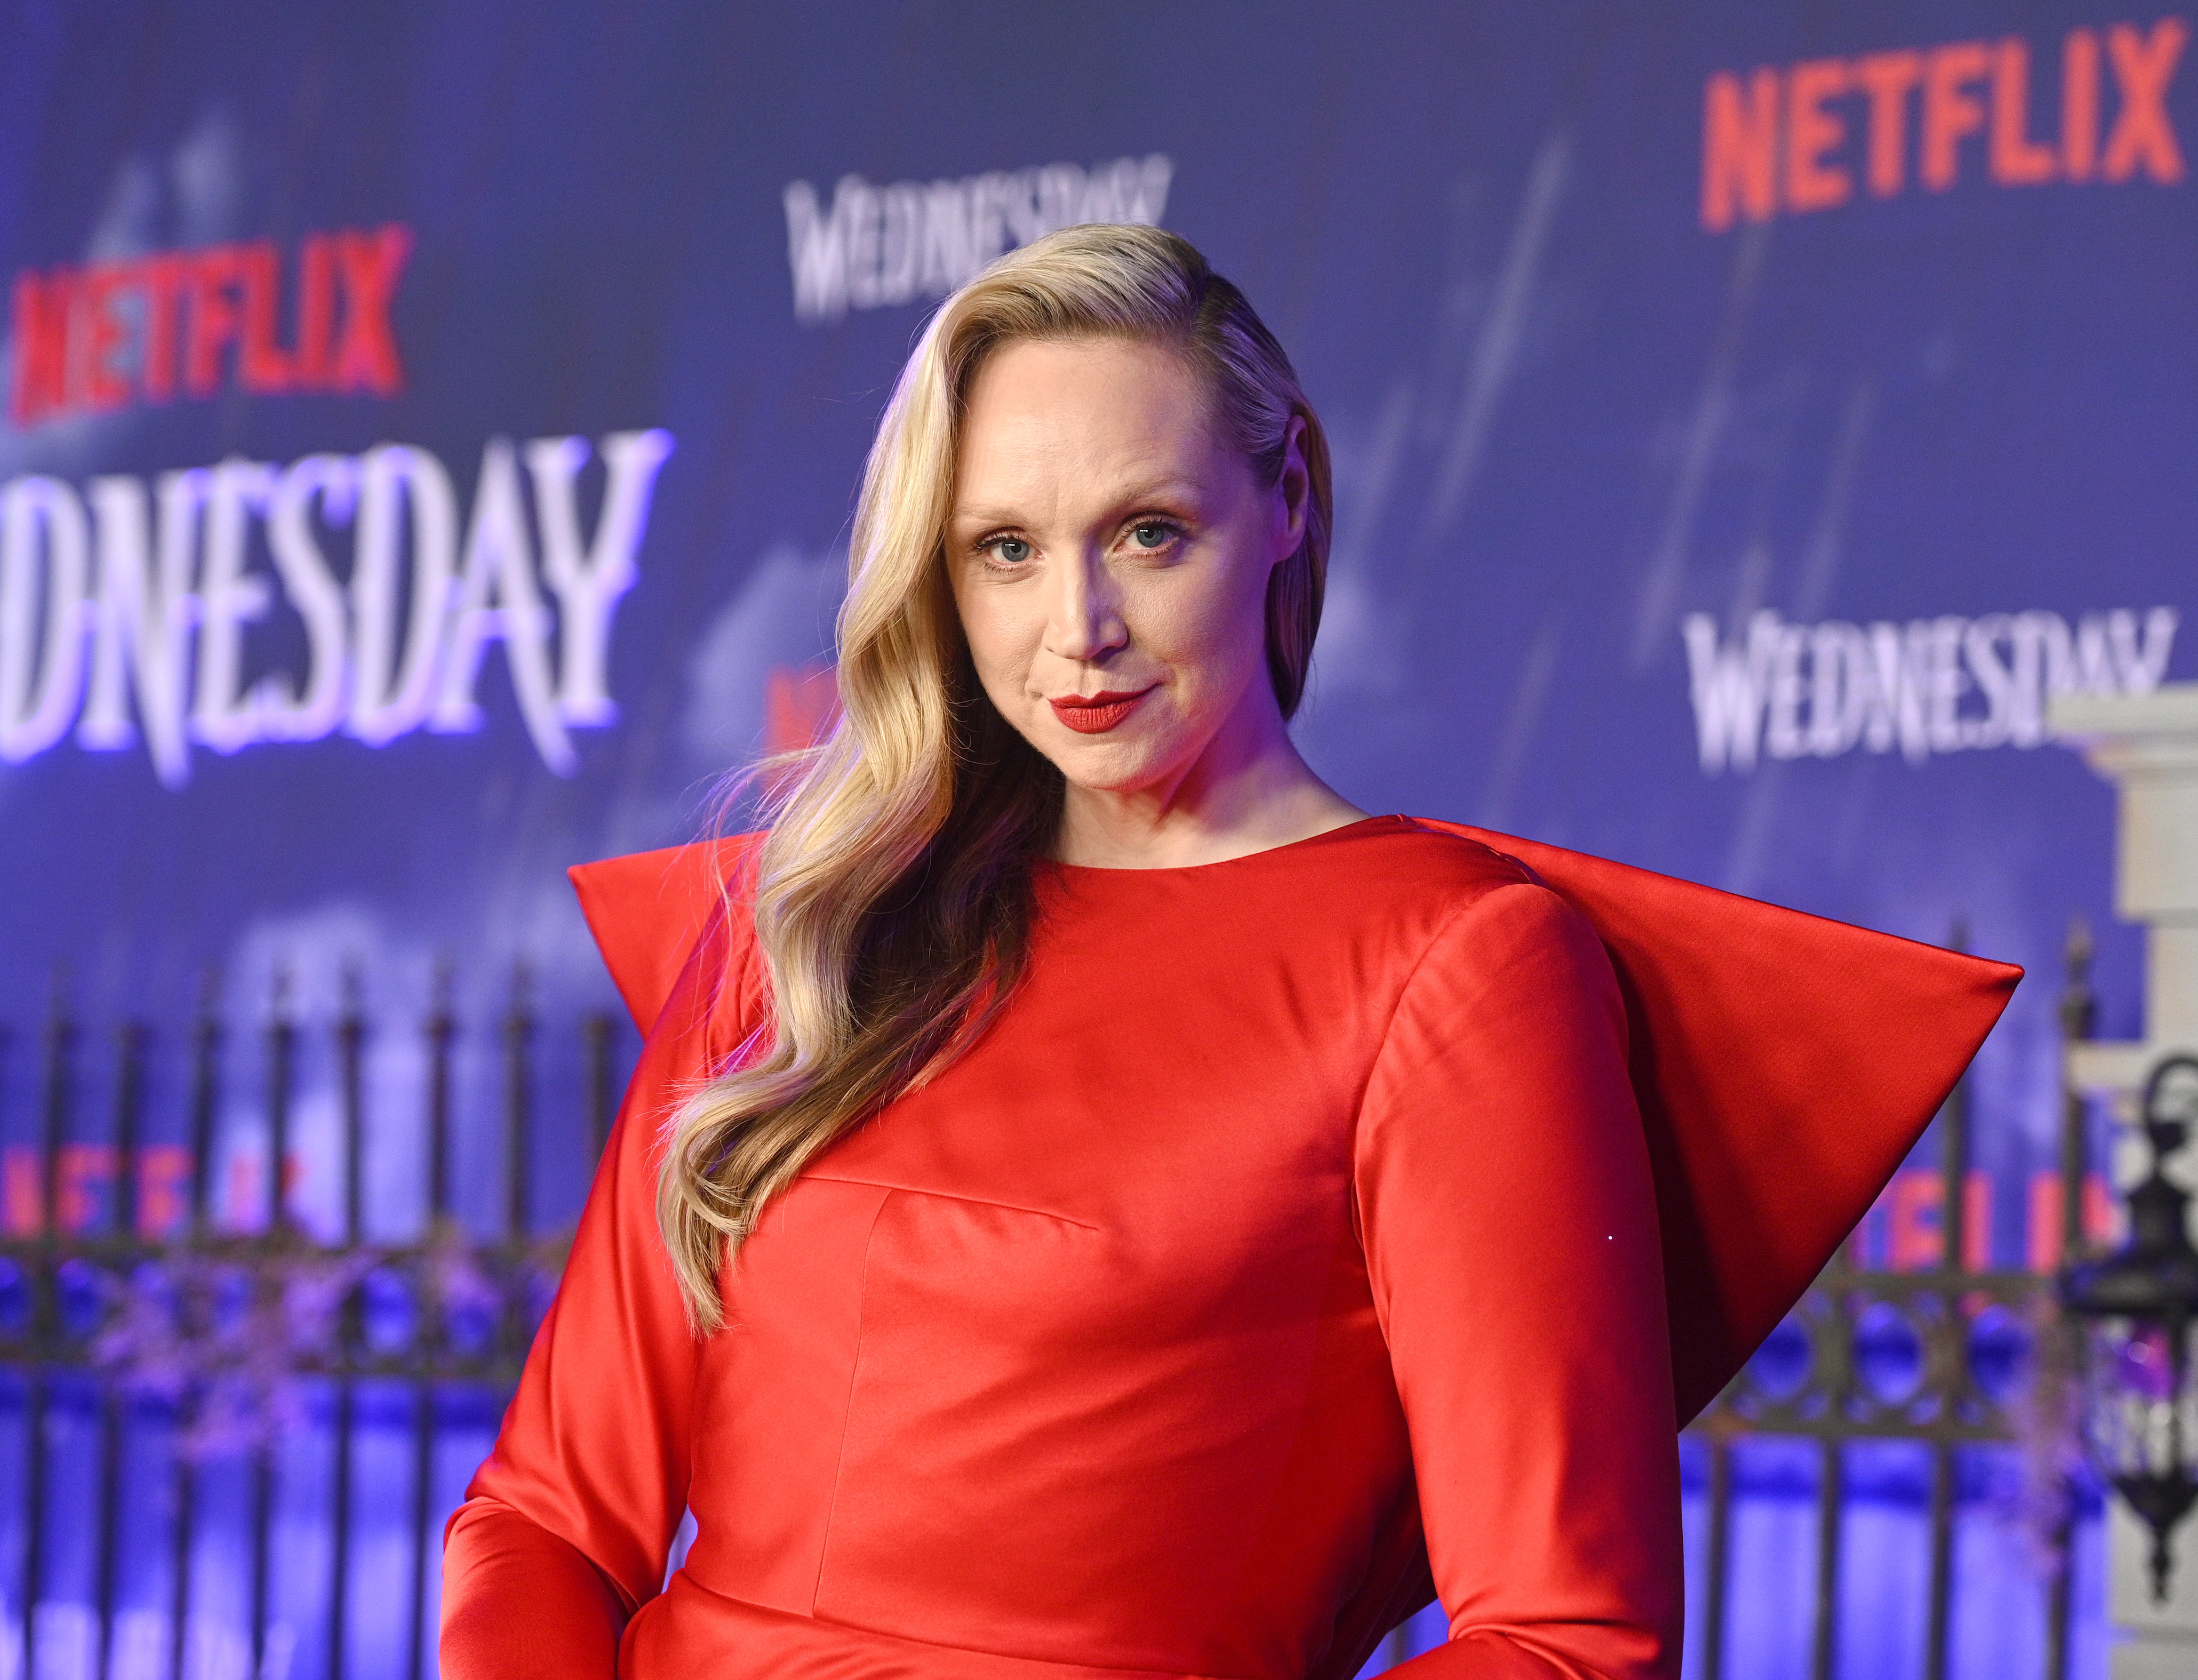 Gwendoline Christie at the "Wednesday" premiere at the Hollywood Legion Theater in Los Angeles, California, on November 16, 2022. | Source: Getty Images